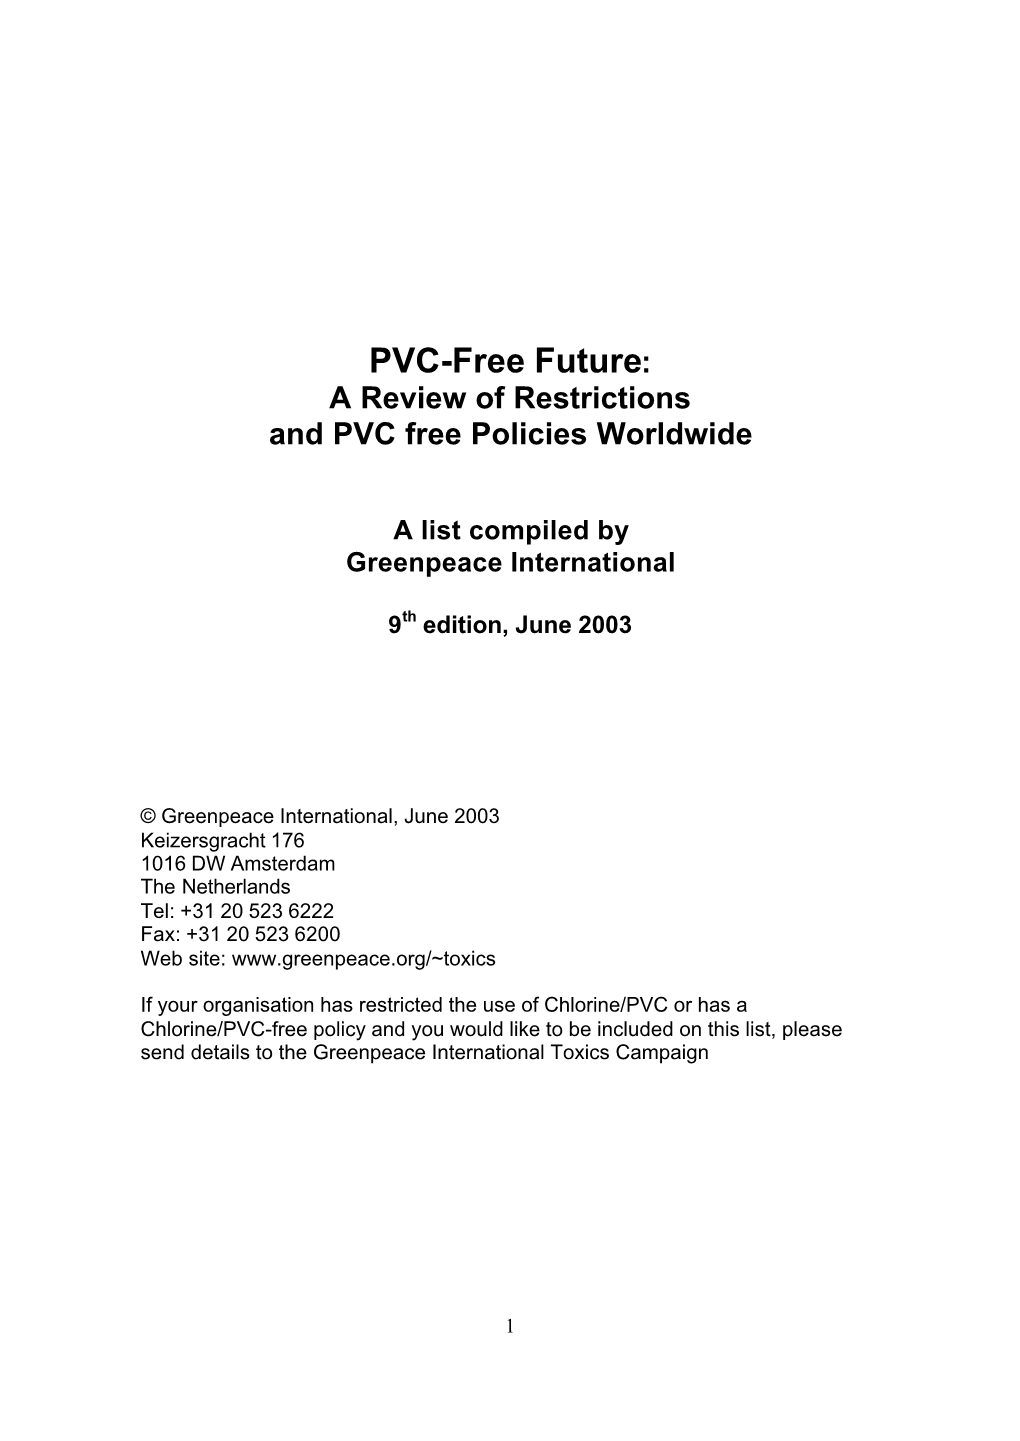 A Review of Restrictions and PVC Free Policies Worldwide